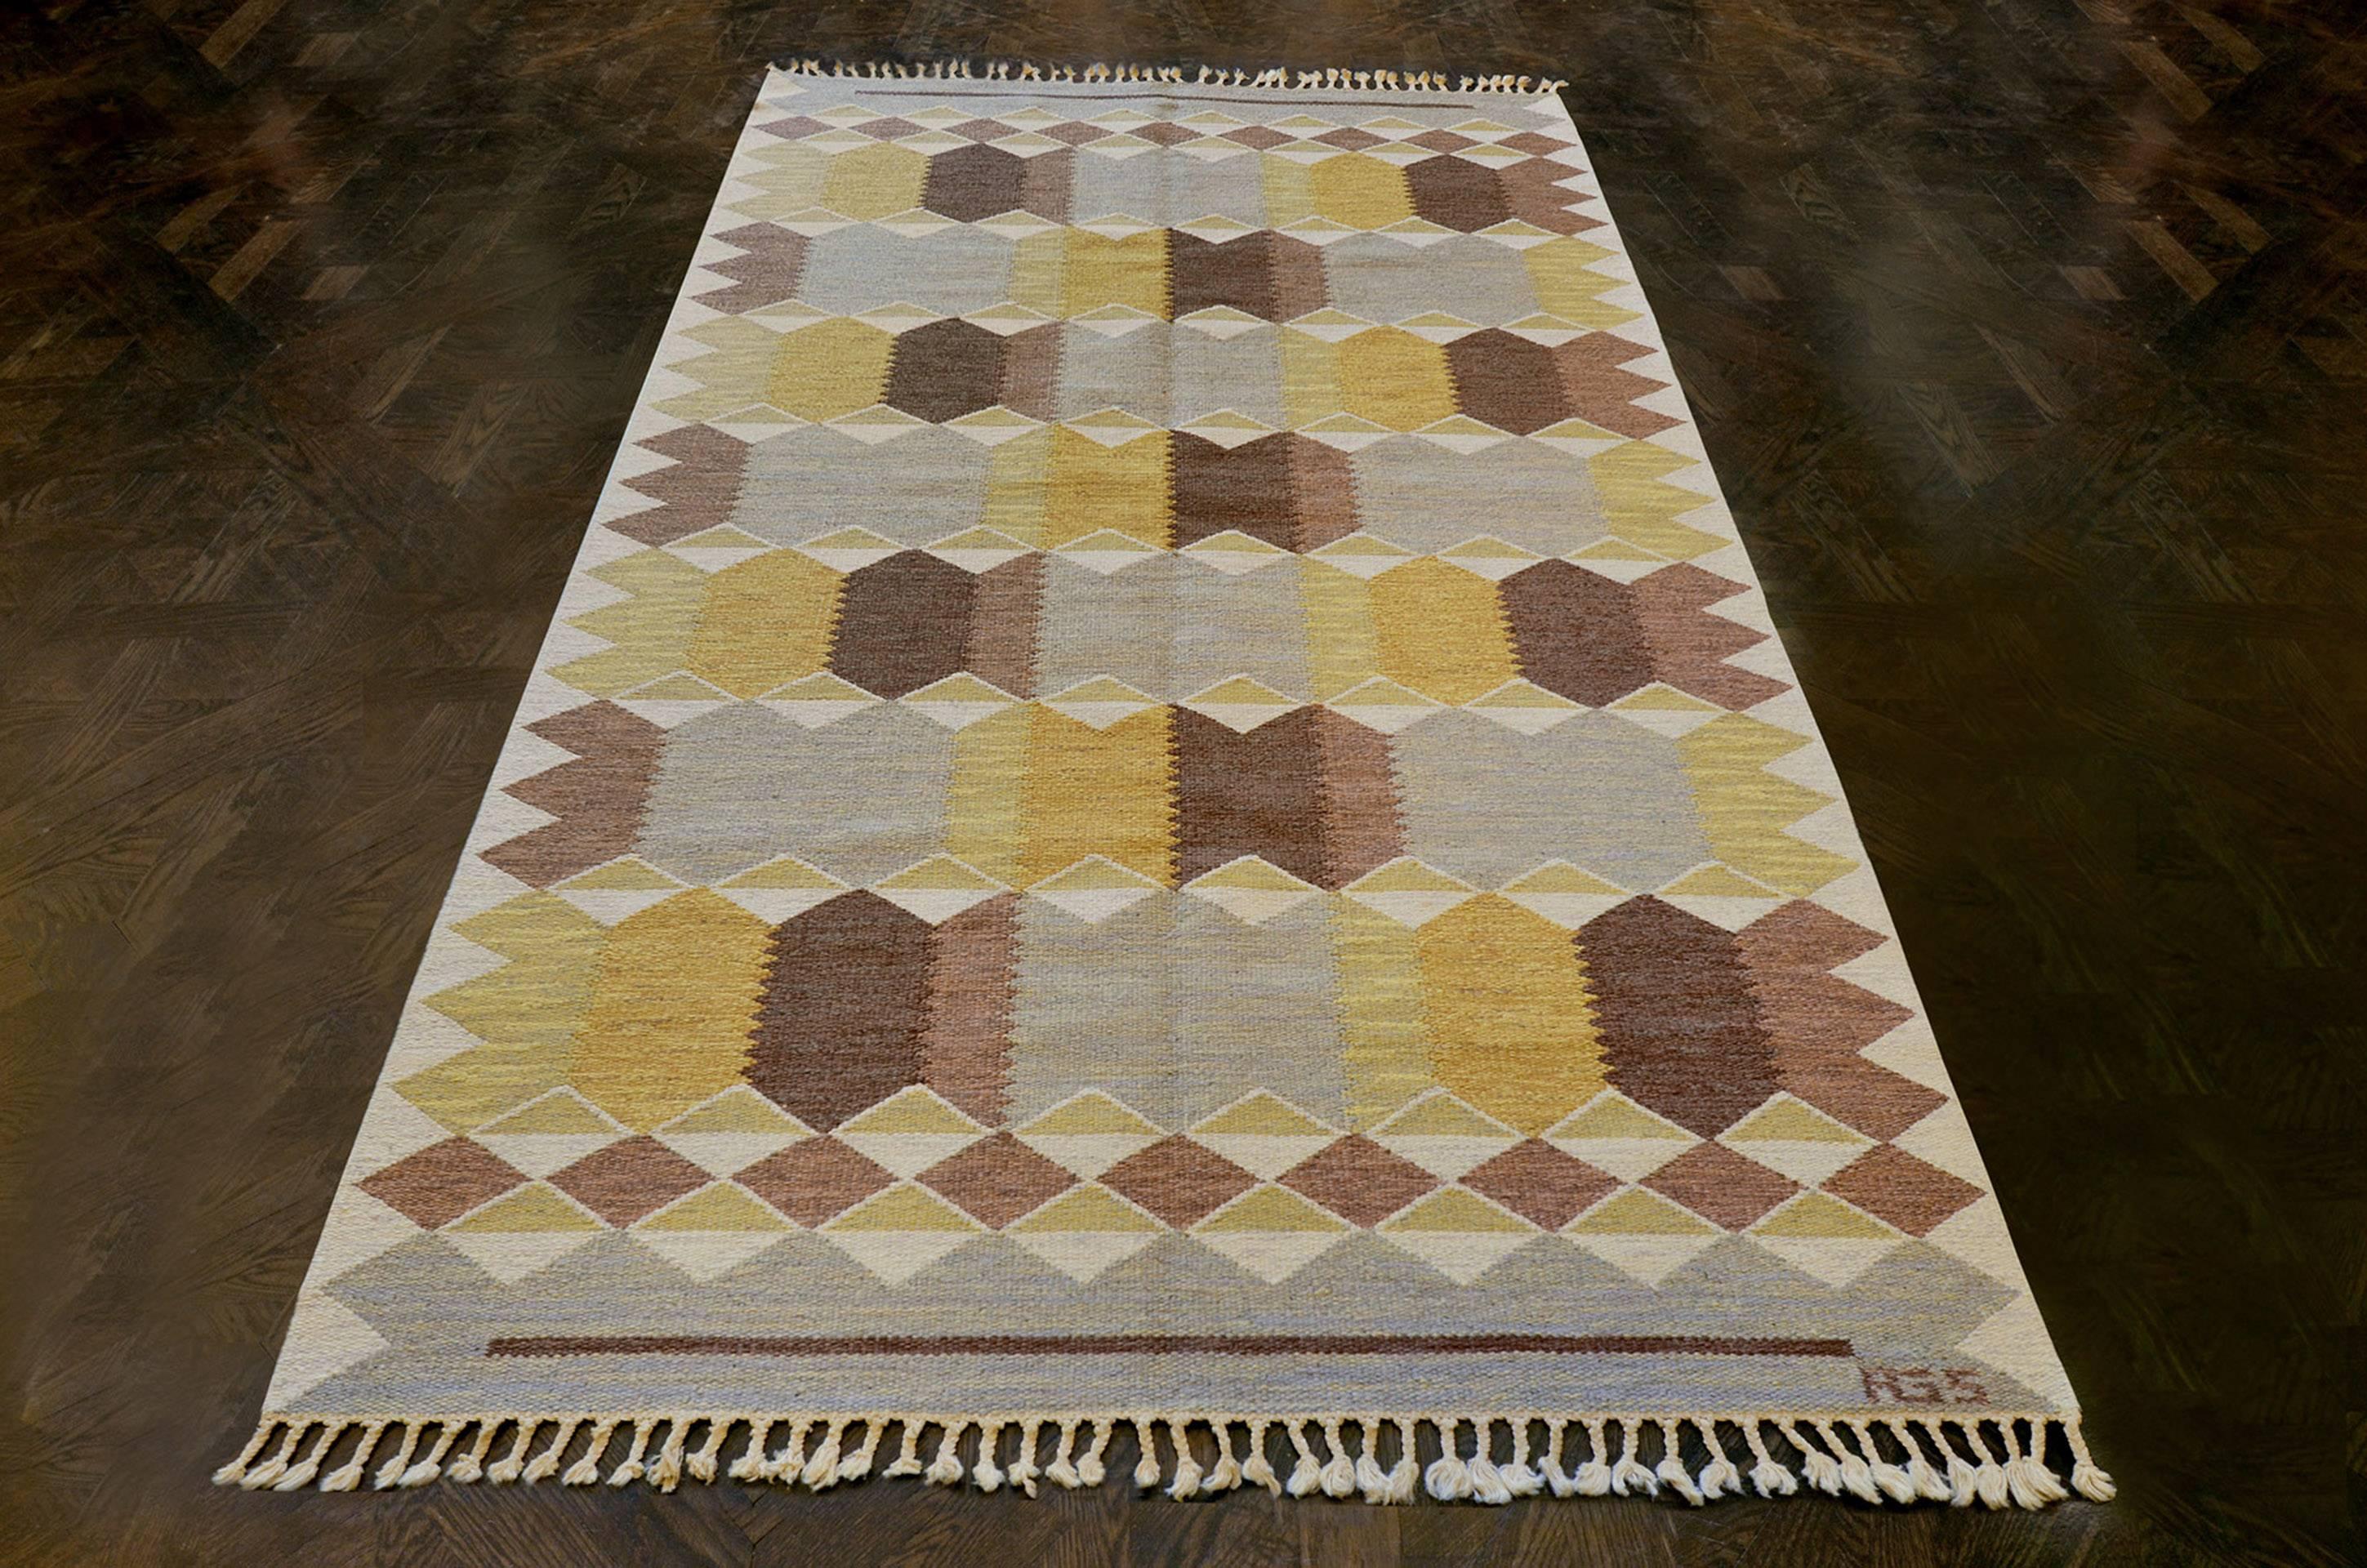 This vintage handwoven Swedish rug has an overall field of tonal brown and yellow serrated and angled lozenges forming a whimsical checkered lattice. Signed by the original artist.